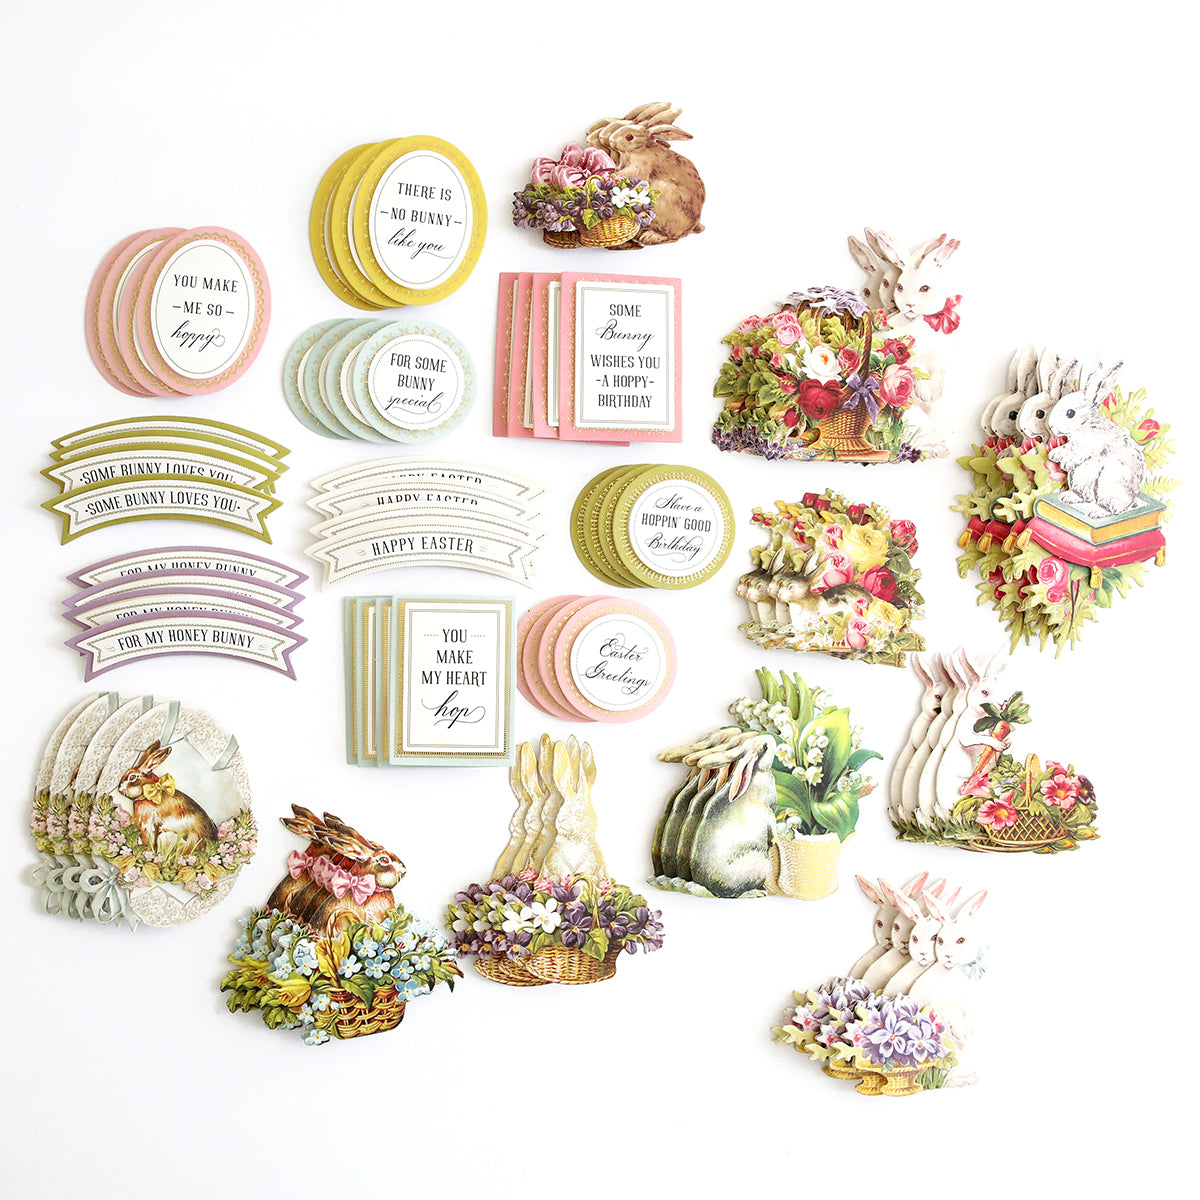 A delightful assortment of Easter cards featuring adorable Bunny Stickers and Sentiments designs, adorned with sentiments and stickers, presented on a pristine white surface.